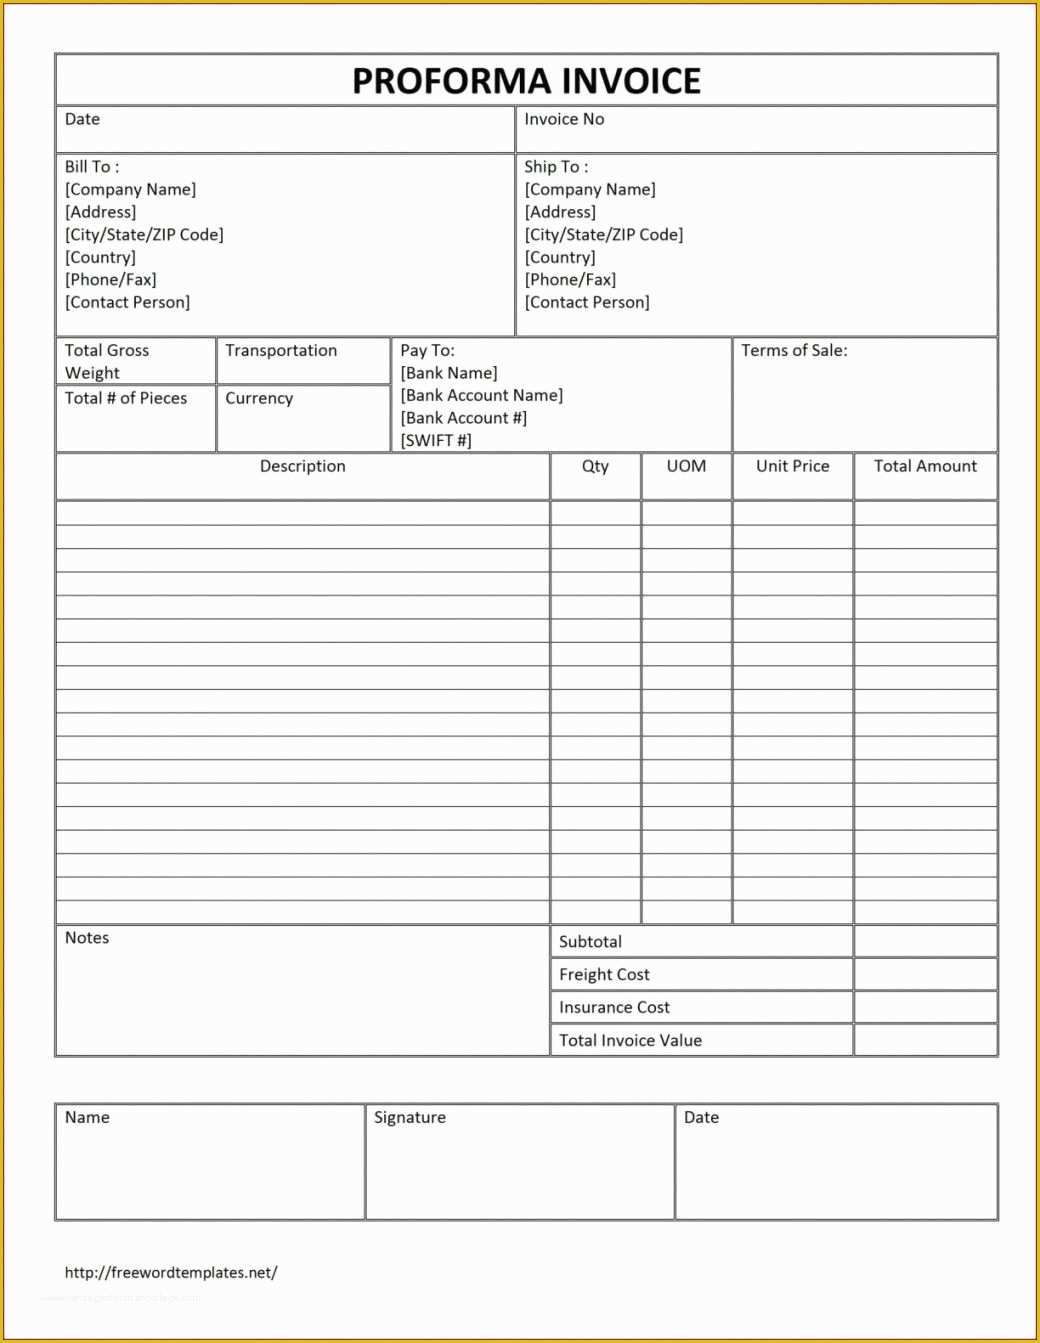 50 Free Trucking Invoices Templates